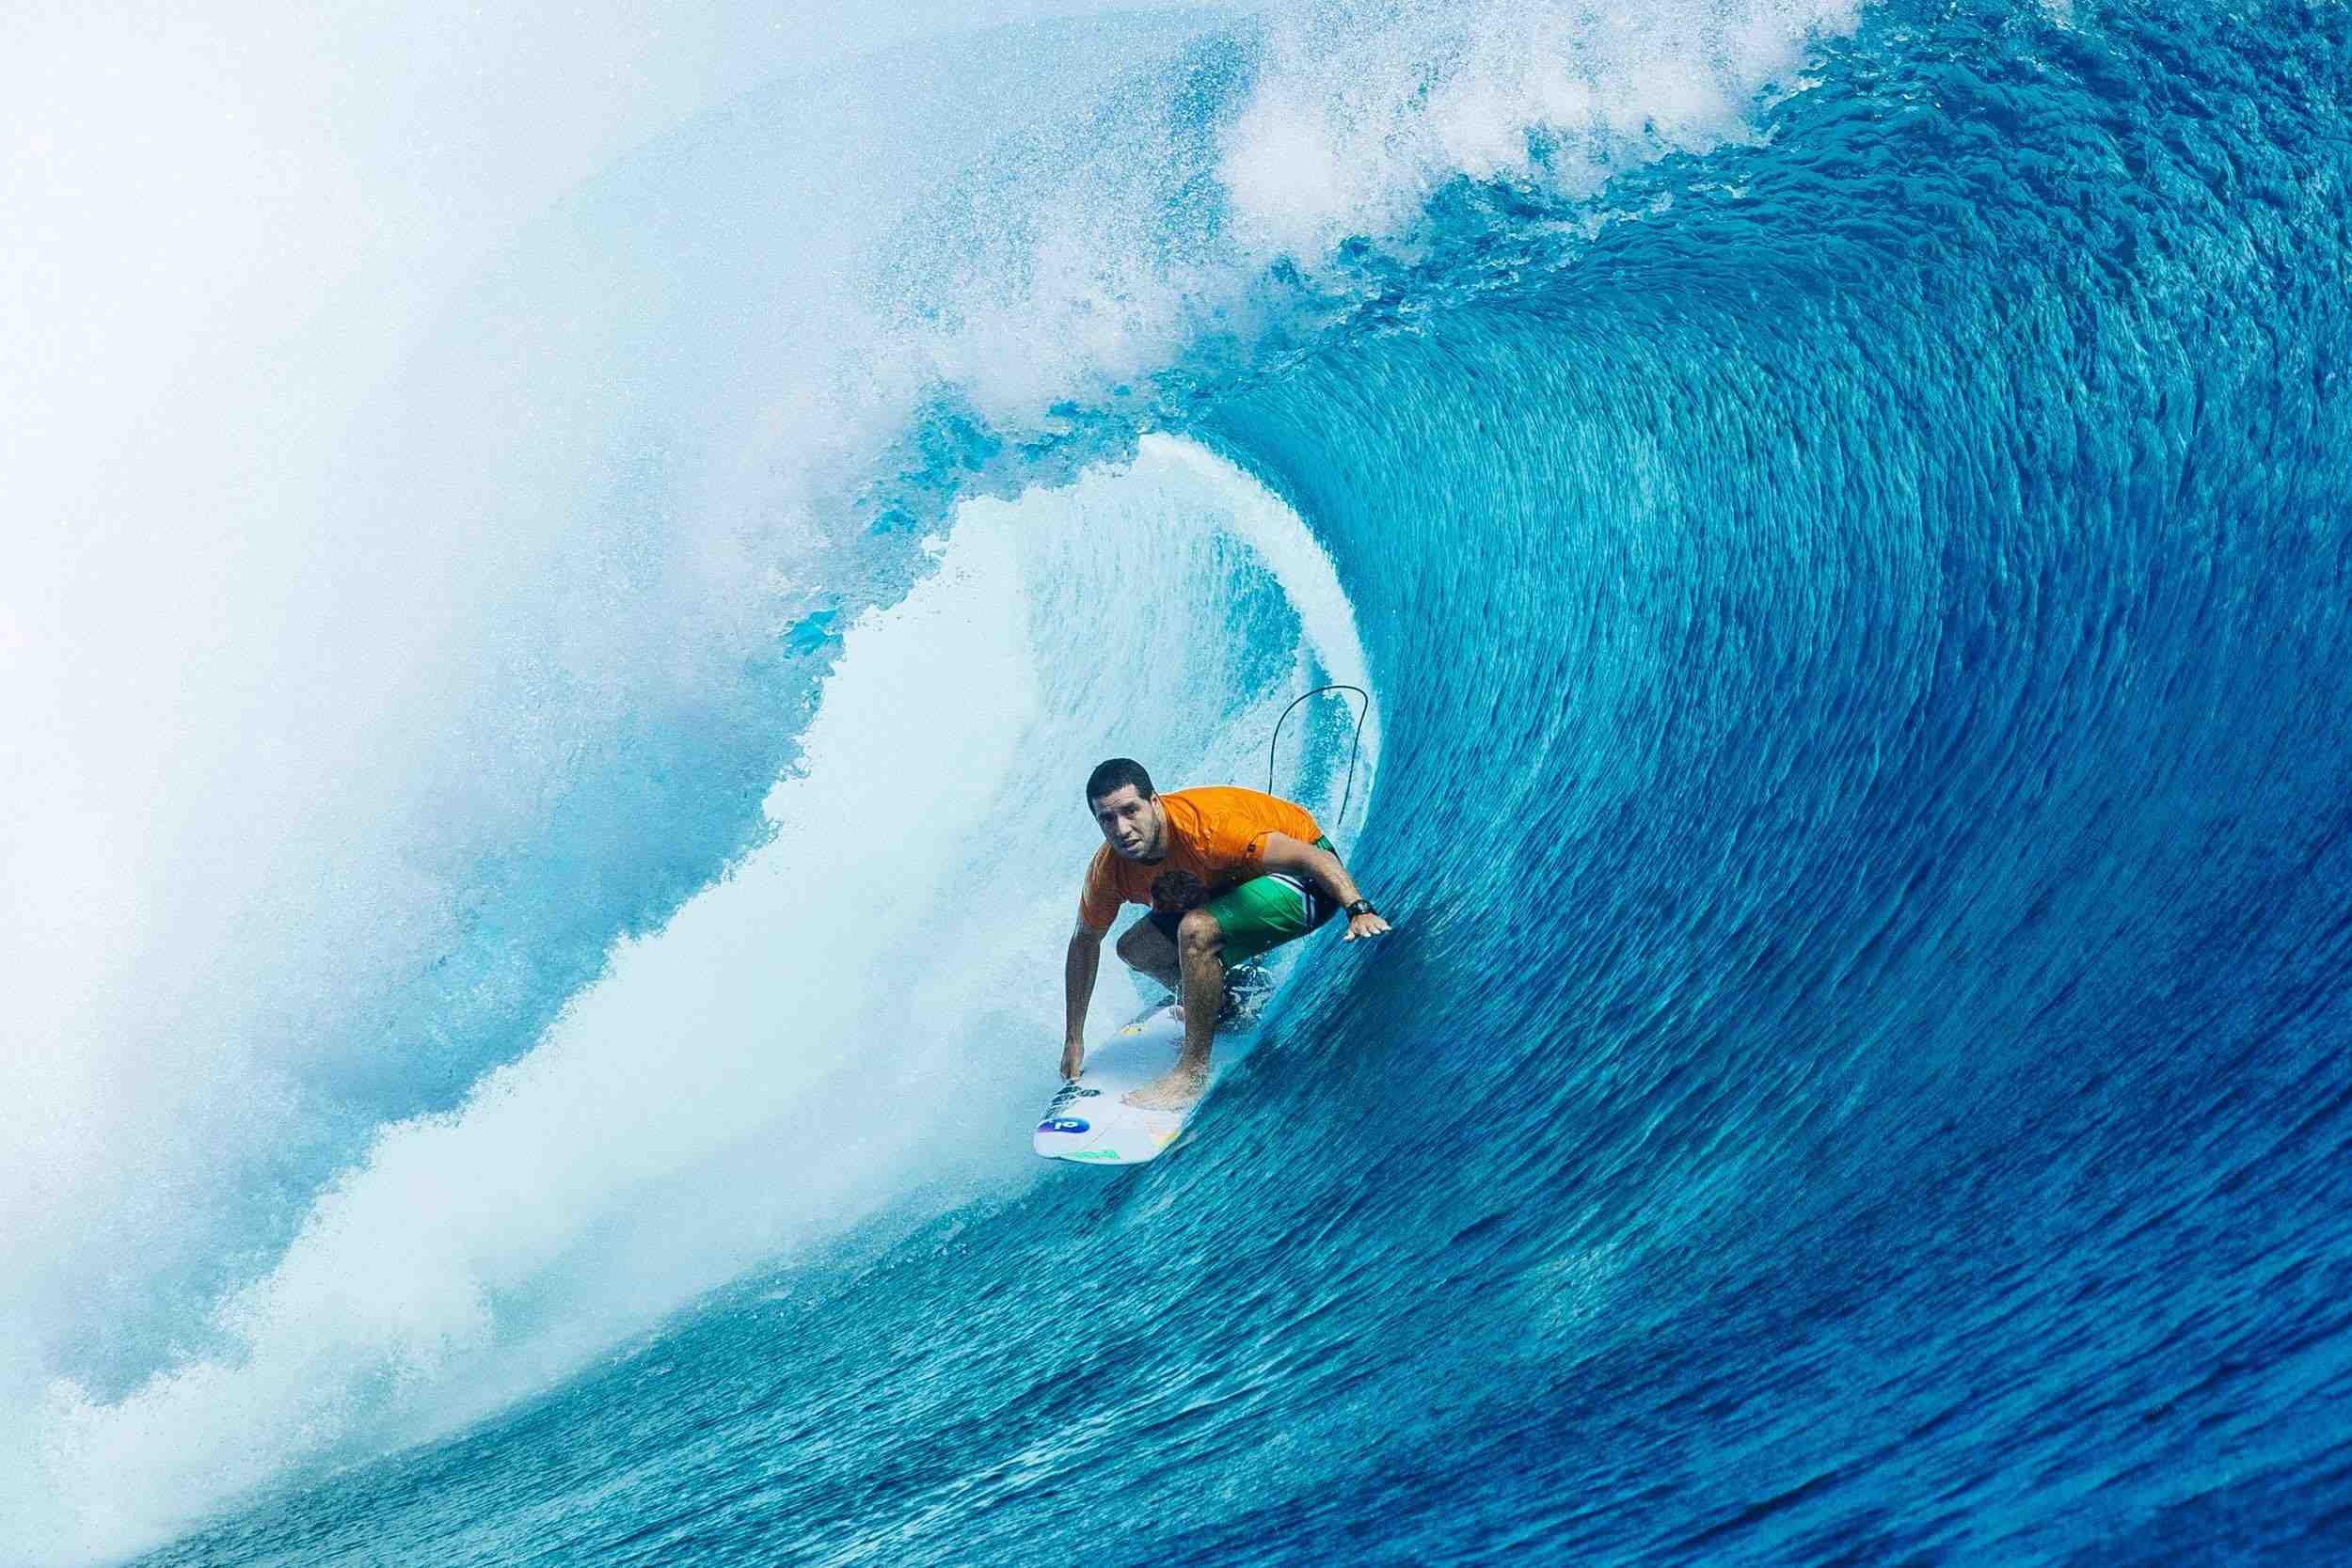 What surfboard does Gabriel Medina use?